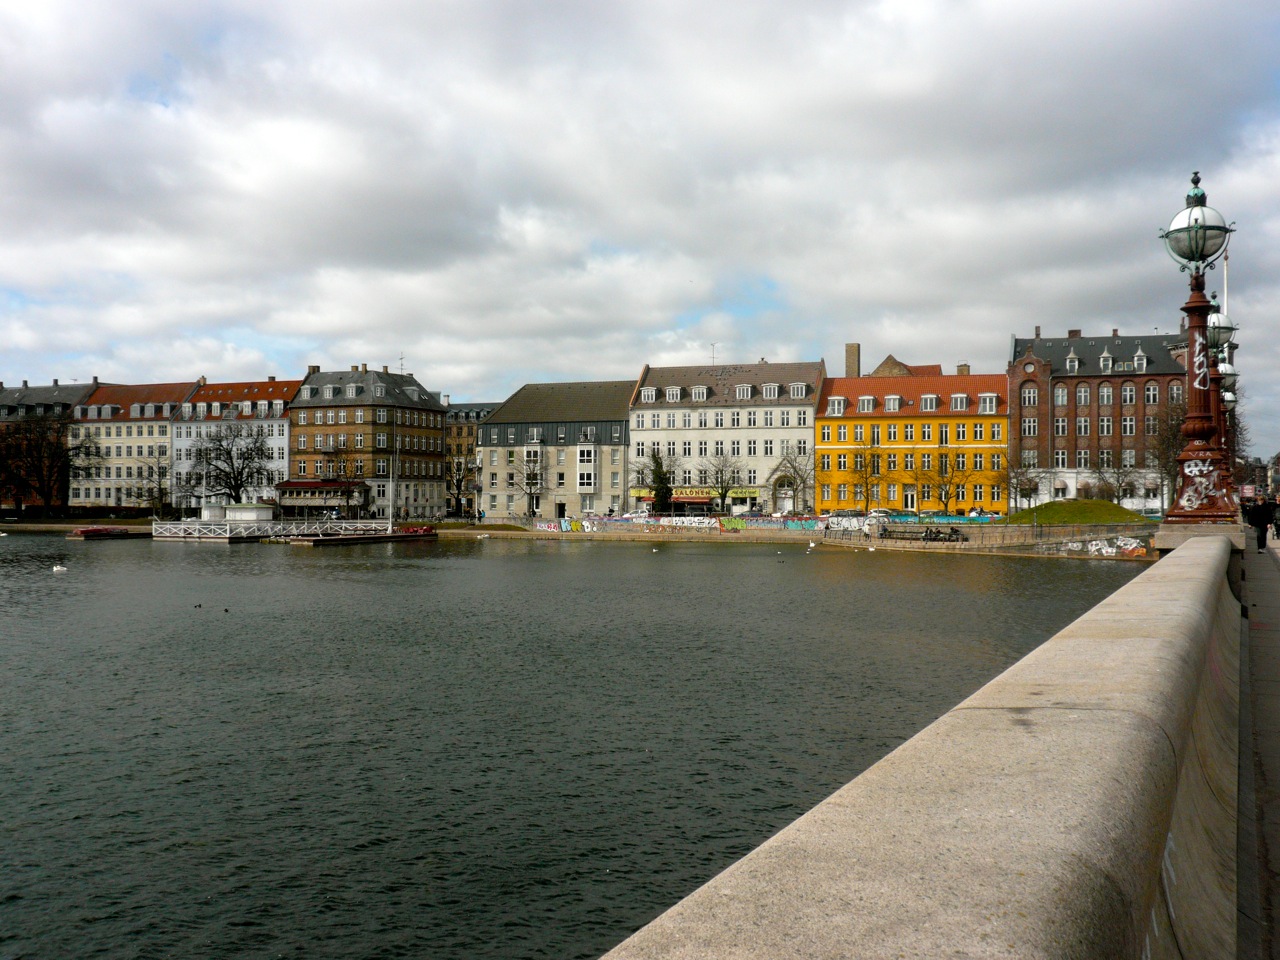 tap-water-warning-in-copenhagen-after-e-coli-found